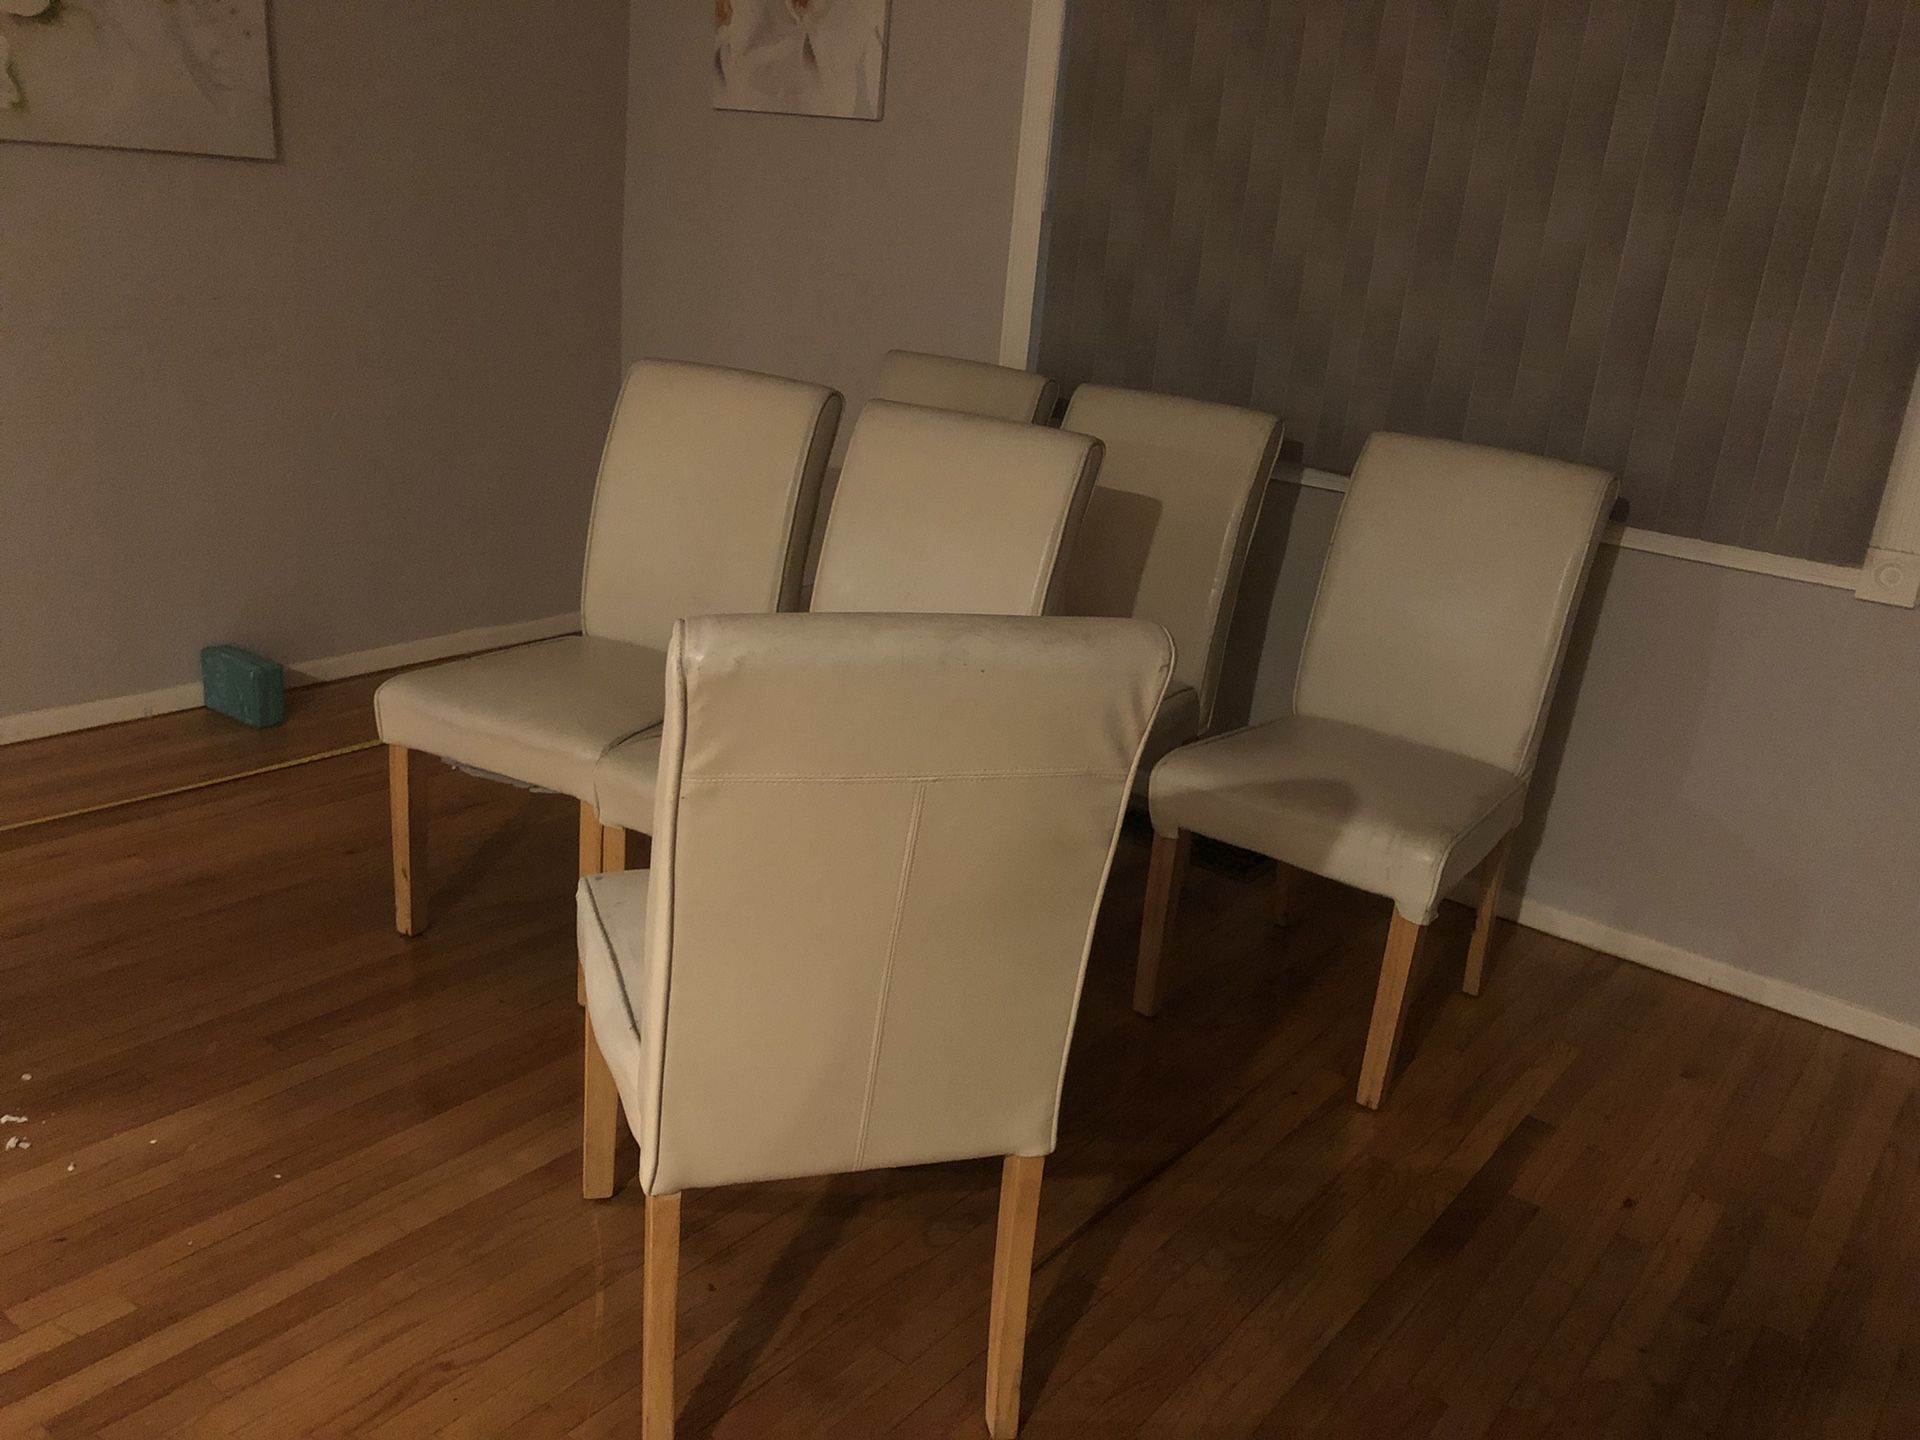 Super offer 10 chairs for 100